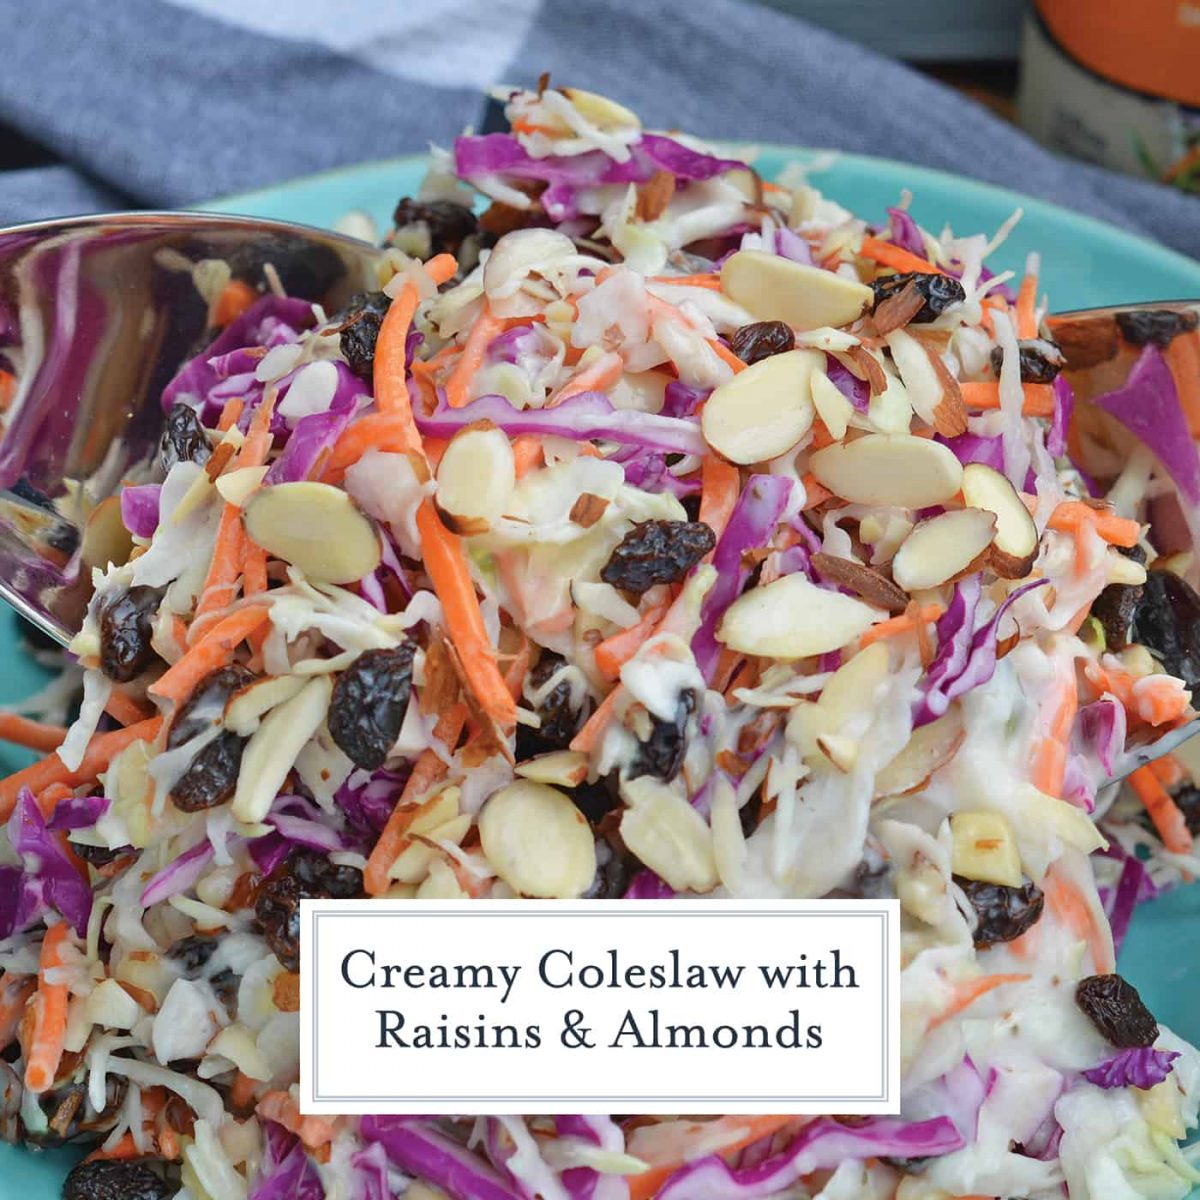 Creamy Coleslaw with almonds and raisins is an easy coleslaw recipe that is mix and serve. Coleslaw dressing, almonds, raisins and crisp cabbage mix are the perfect BBQ dish. #creamycoleslaw #coleslawrecipe www.savoryexperiments.com